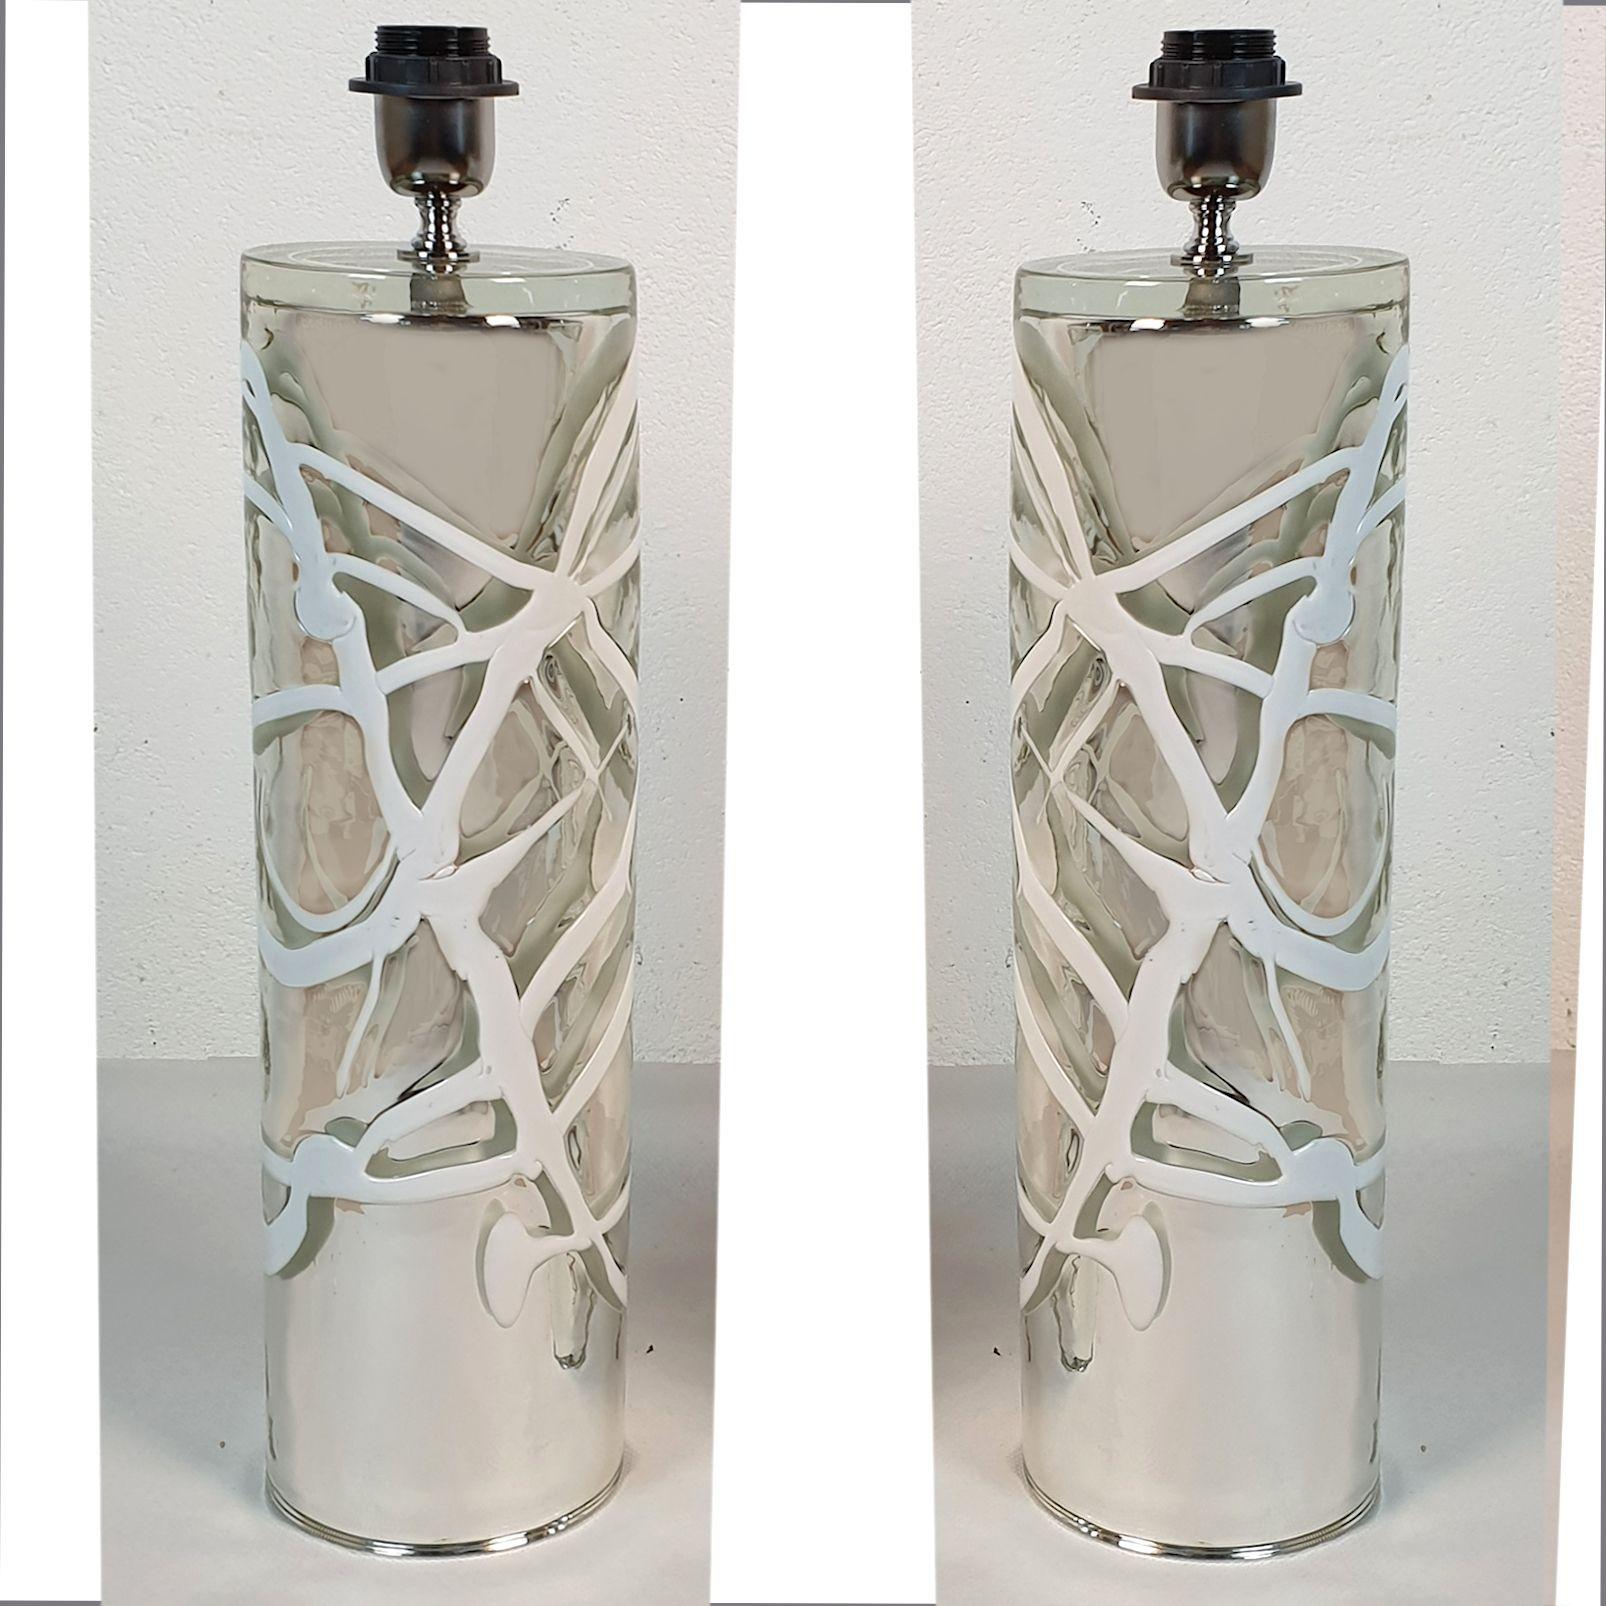 Tall pair of Mid-Century Modern Murano glass table lamps, in the manner of Venini, Italy 1970s.
The pair of table lamps have a cylindrical shape and are made of a heavy plain Murano glass.
The glass is silver and mirrored, with white handmade lines